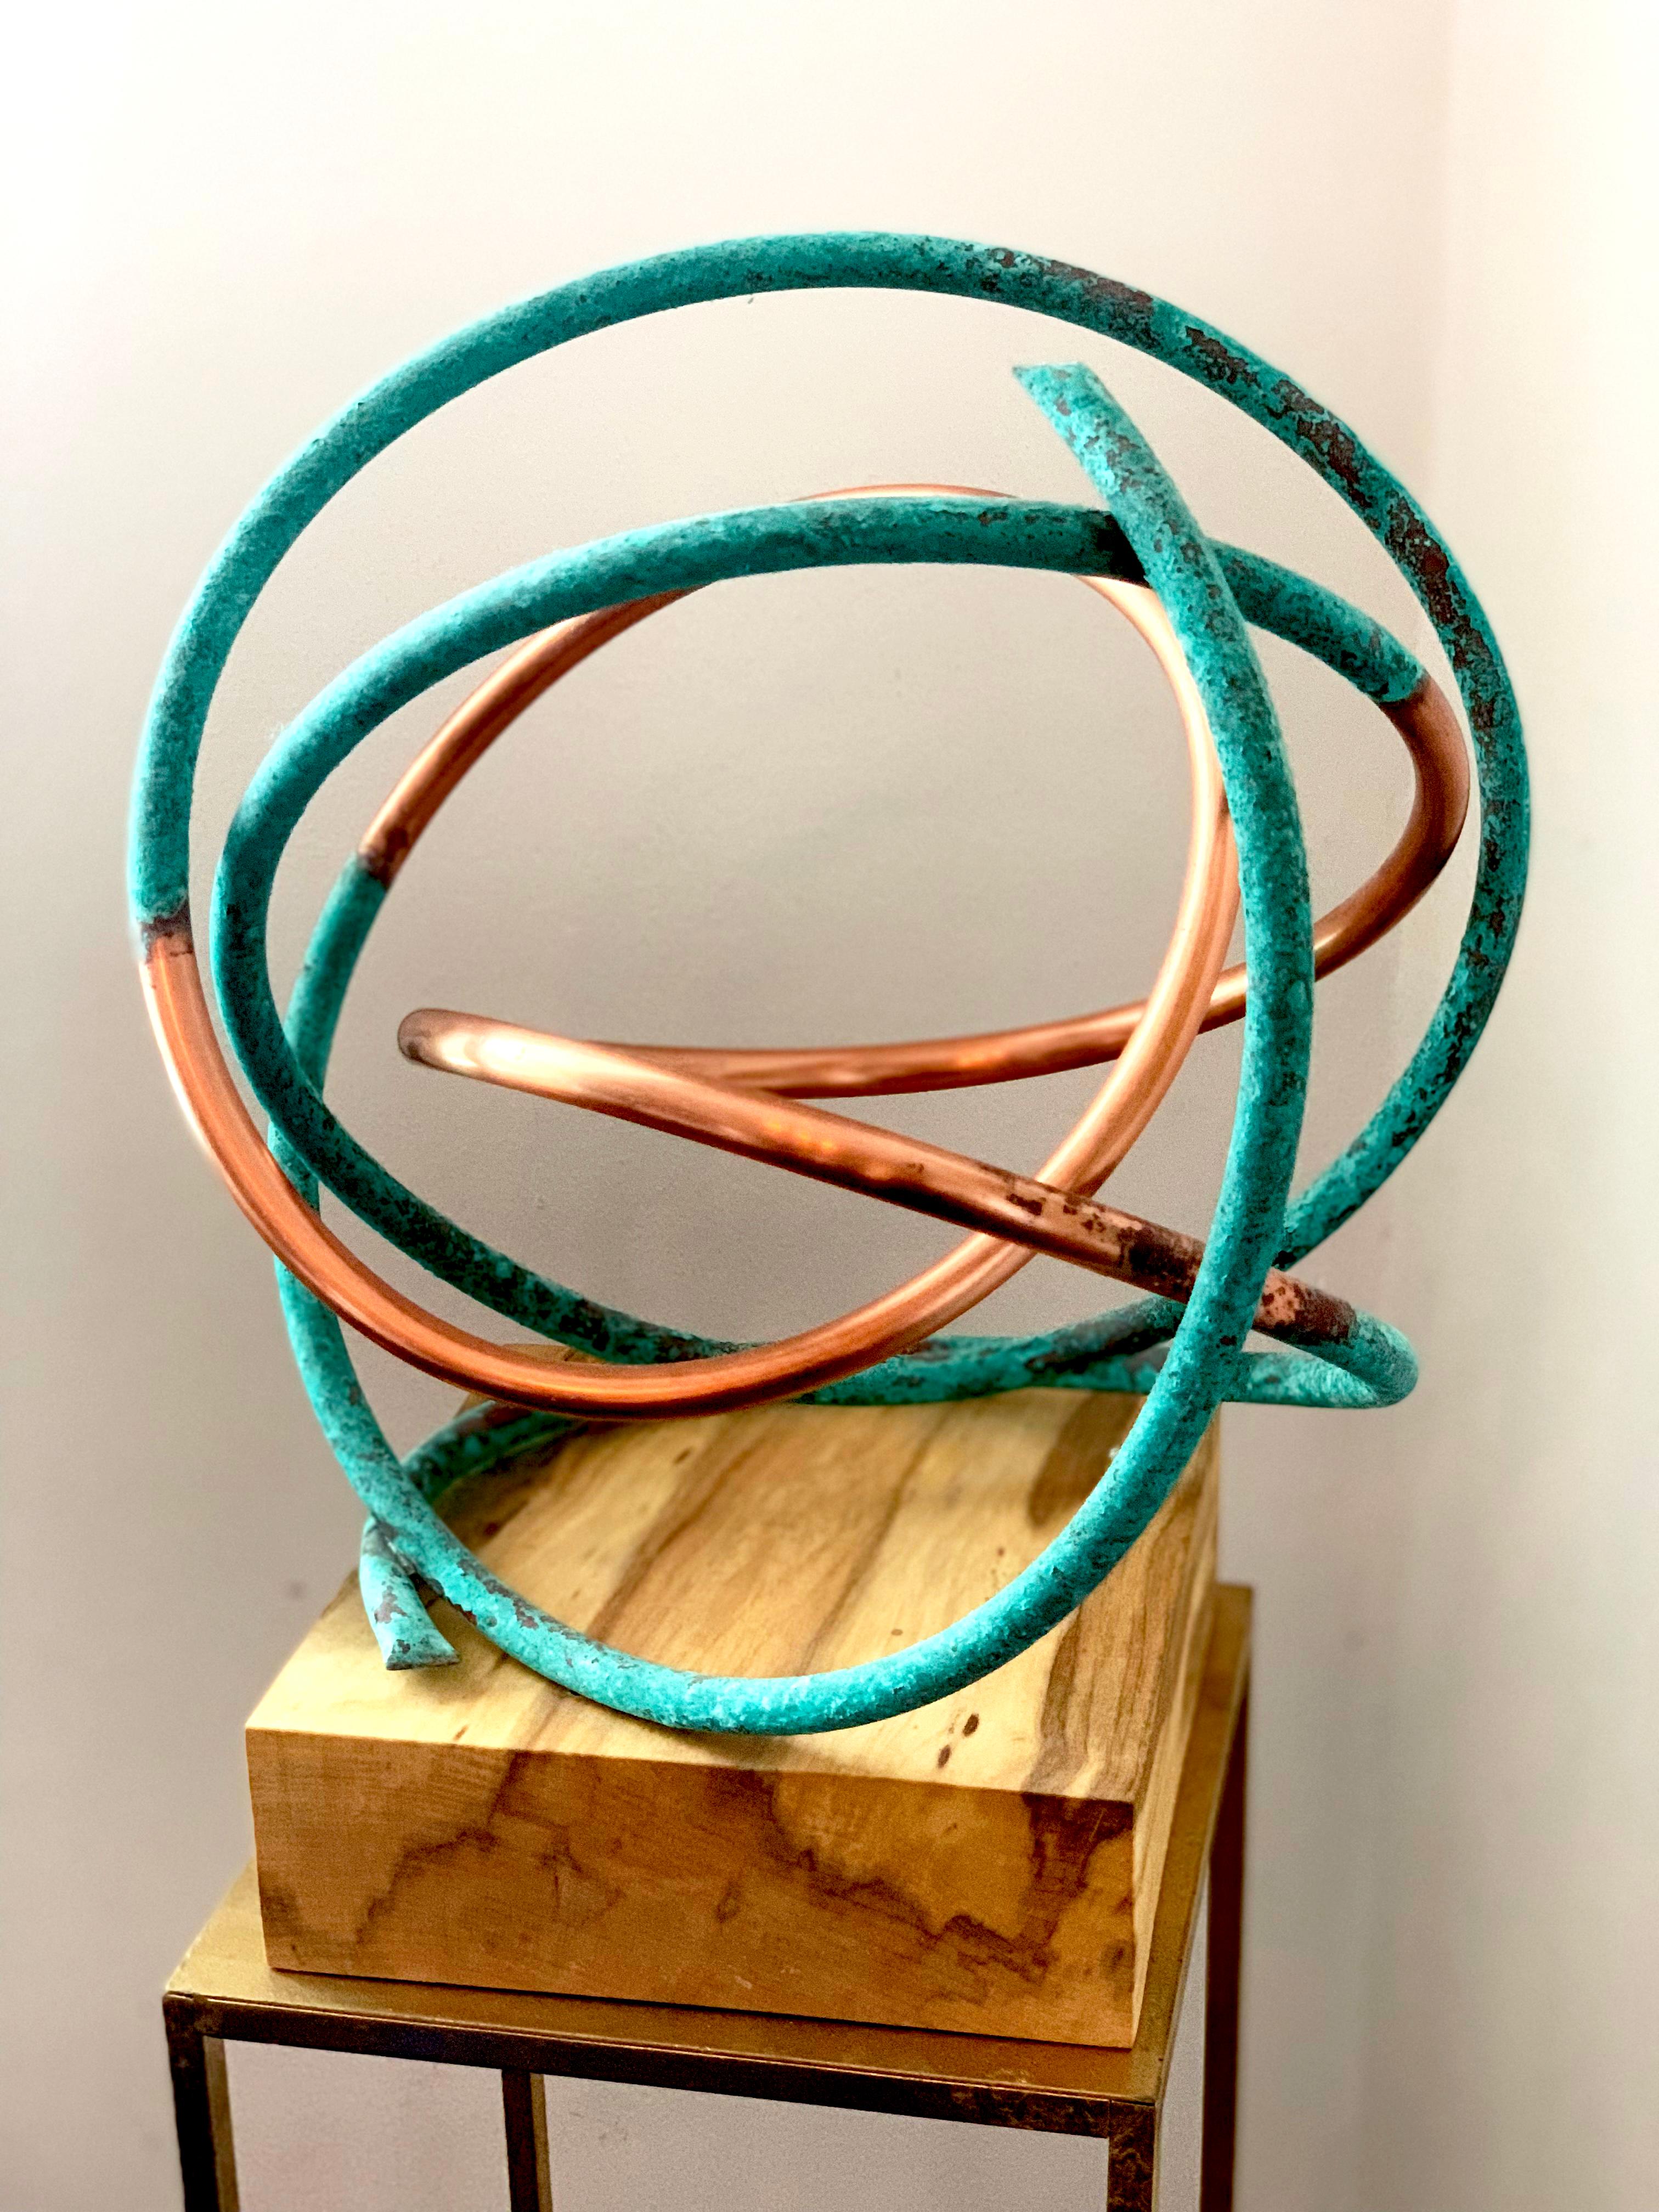 Copper in Verdigris Sculpture - Weather and polished copper on sycamore base 2